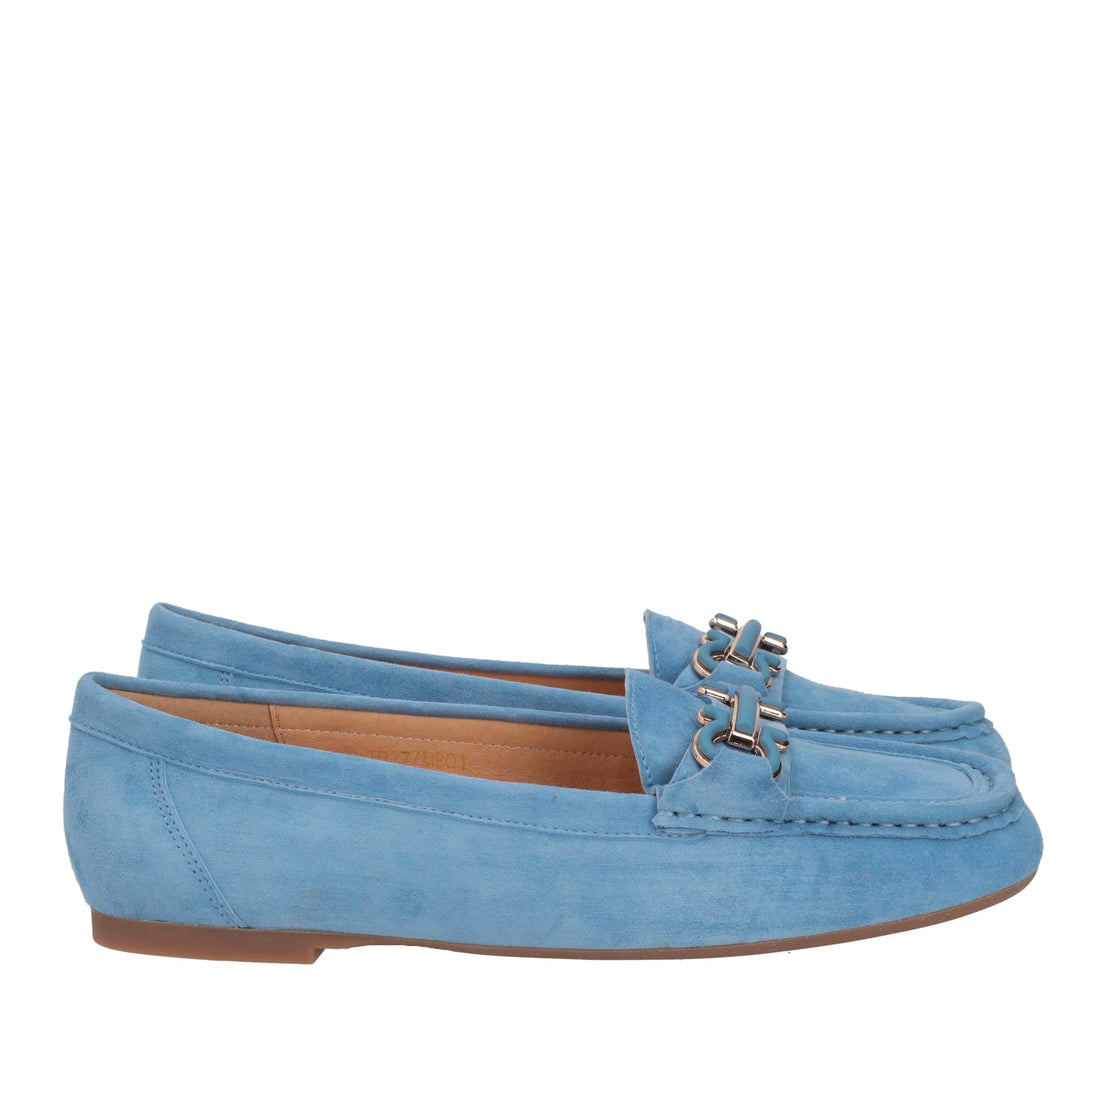 LIGHT BLUE CARMEN LEATHER MOCCASIN WITH CLAMP